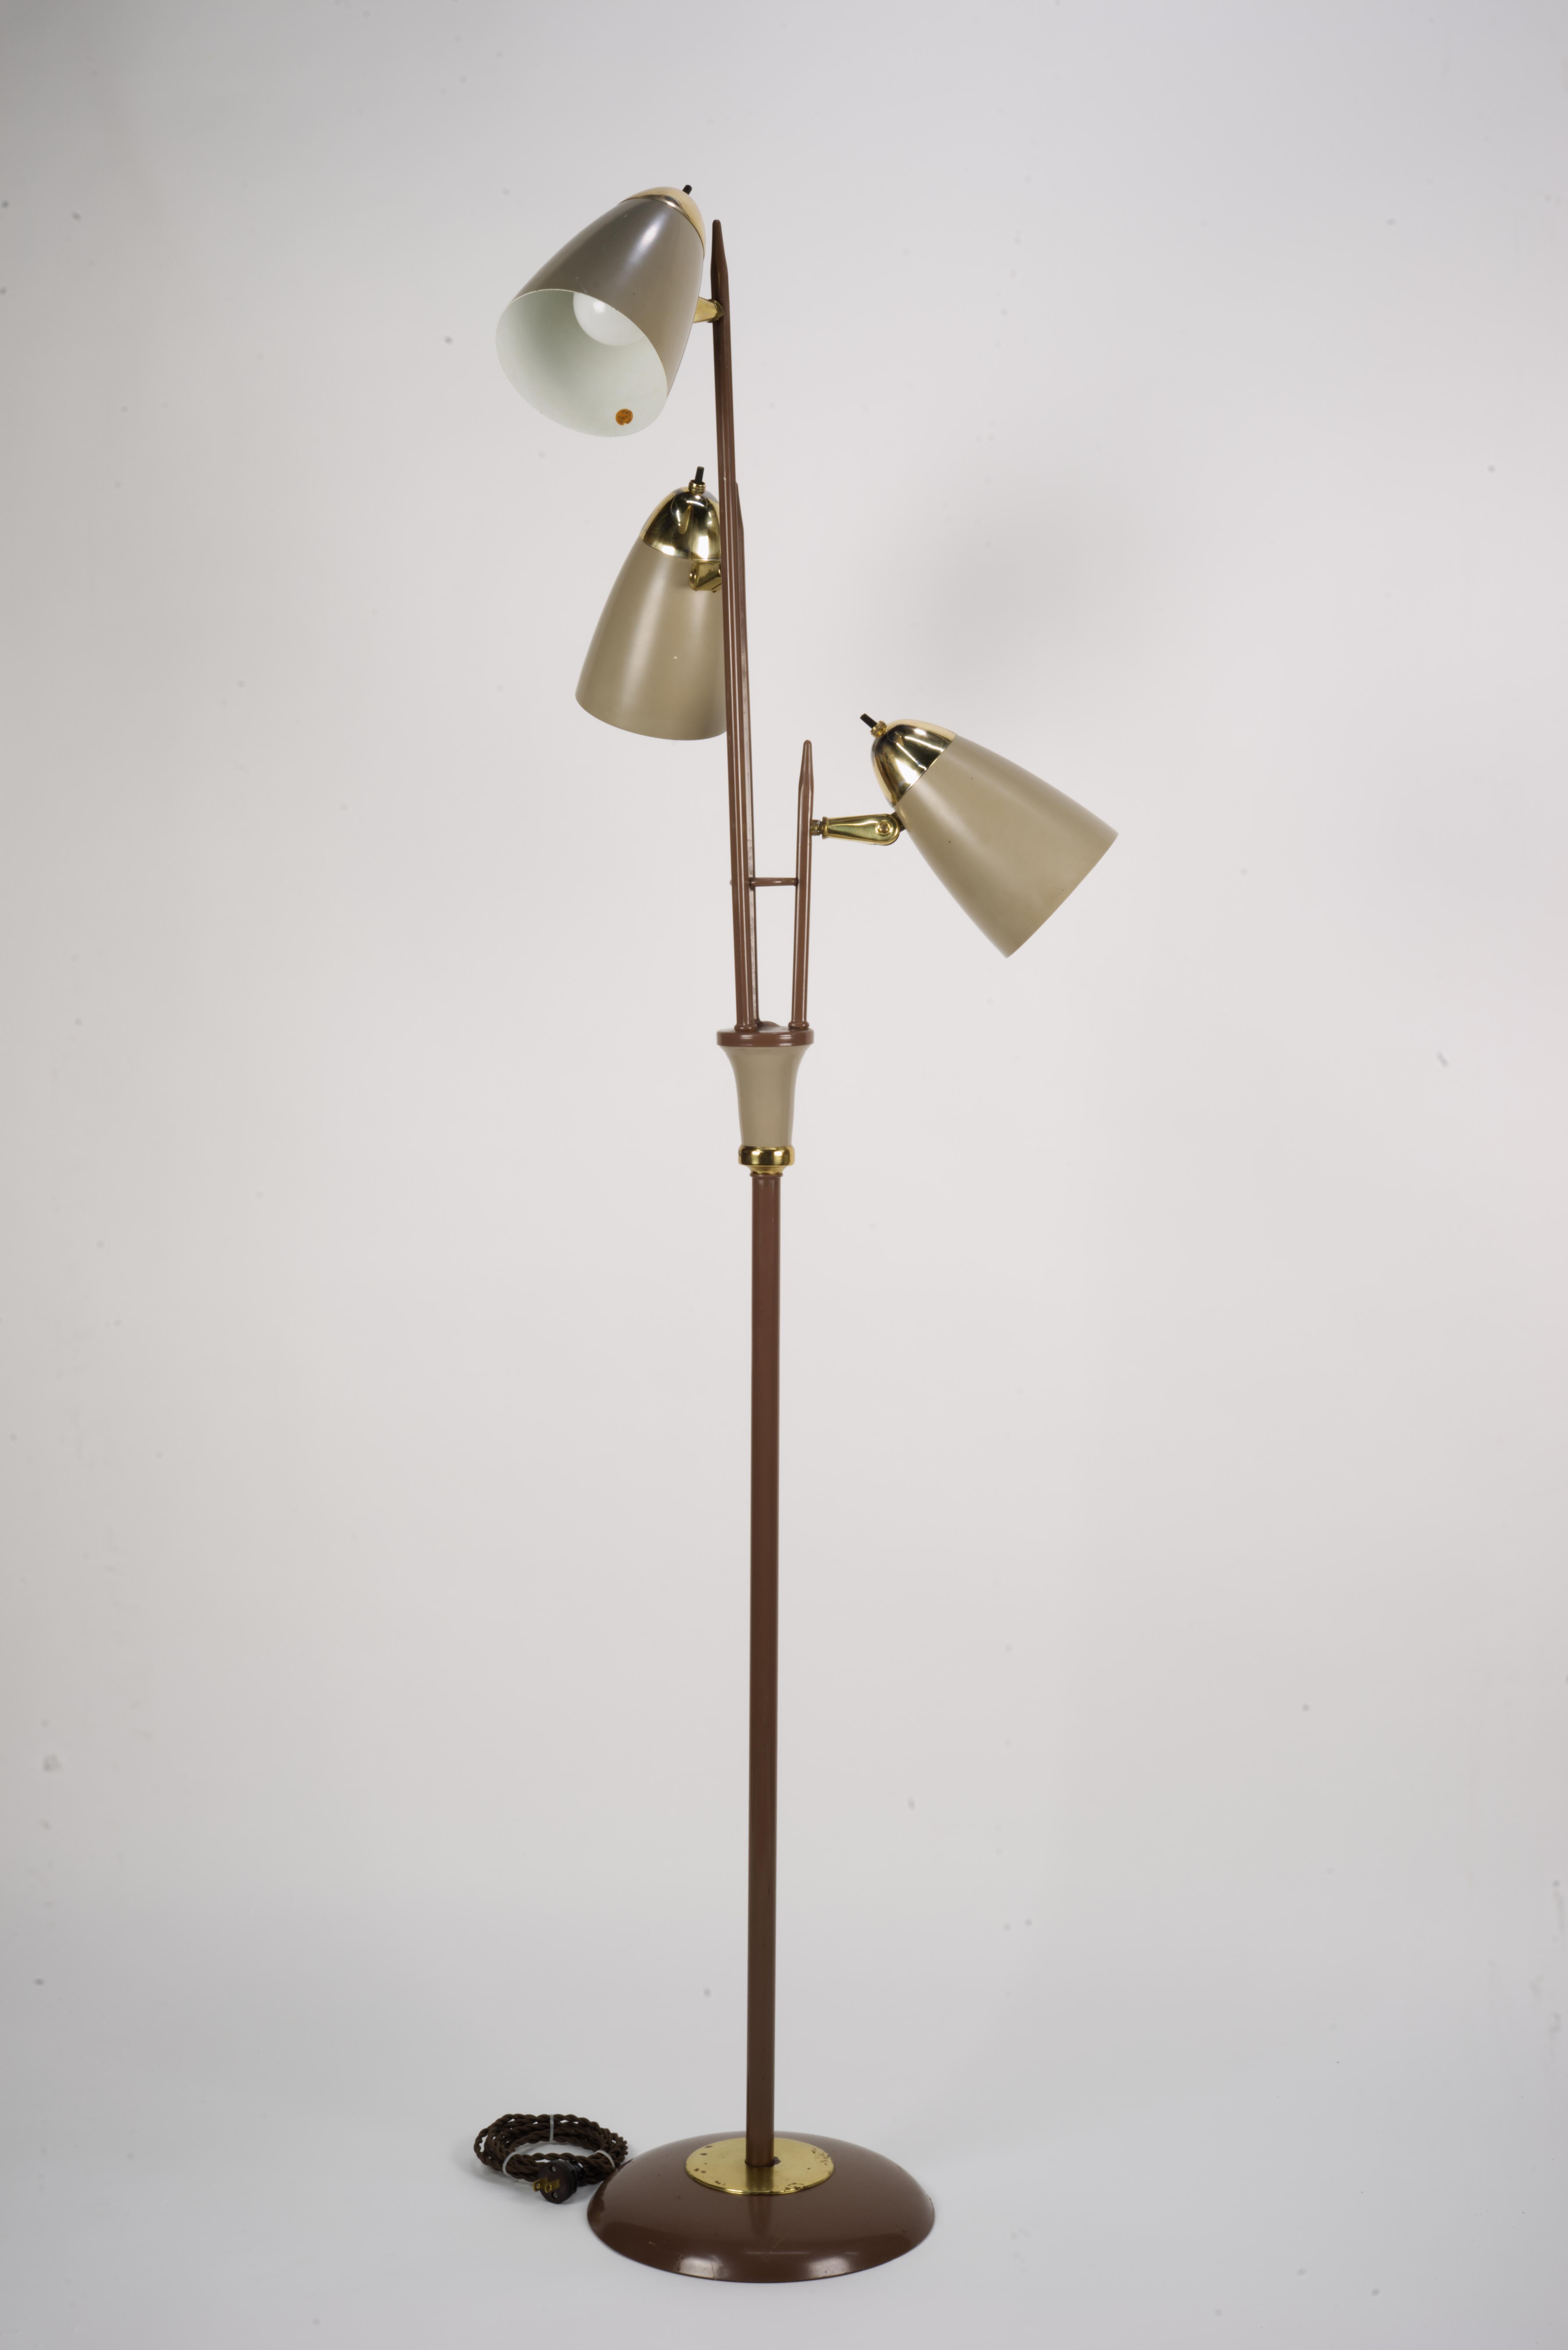 Gerald Thurston Triennale Floor Lamp. This is a well known iconic design. 
Lamp, undergone a good deal of cleaning. 
Sockets were replaced with premium UL listed units. All lights work and the heads are adjustable. 
There are a few scratches on the